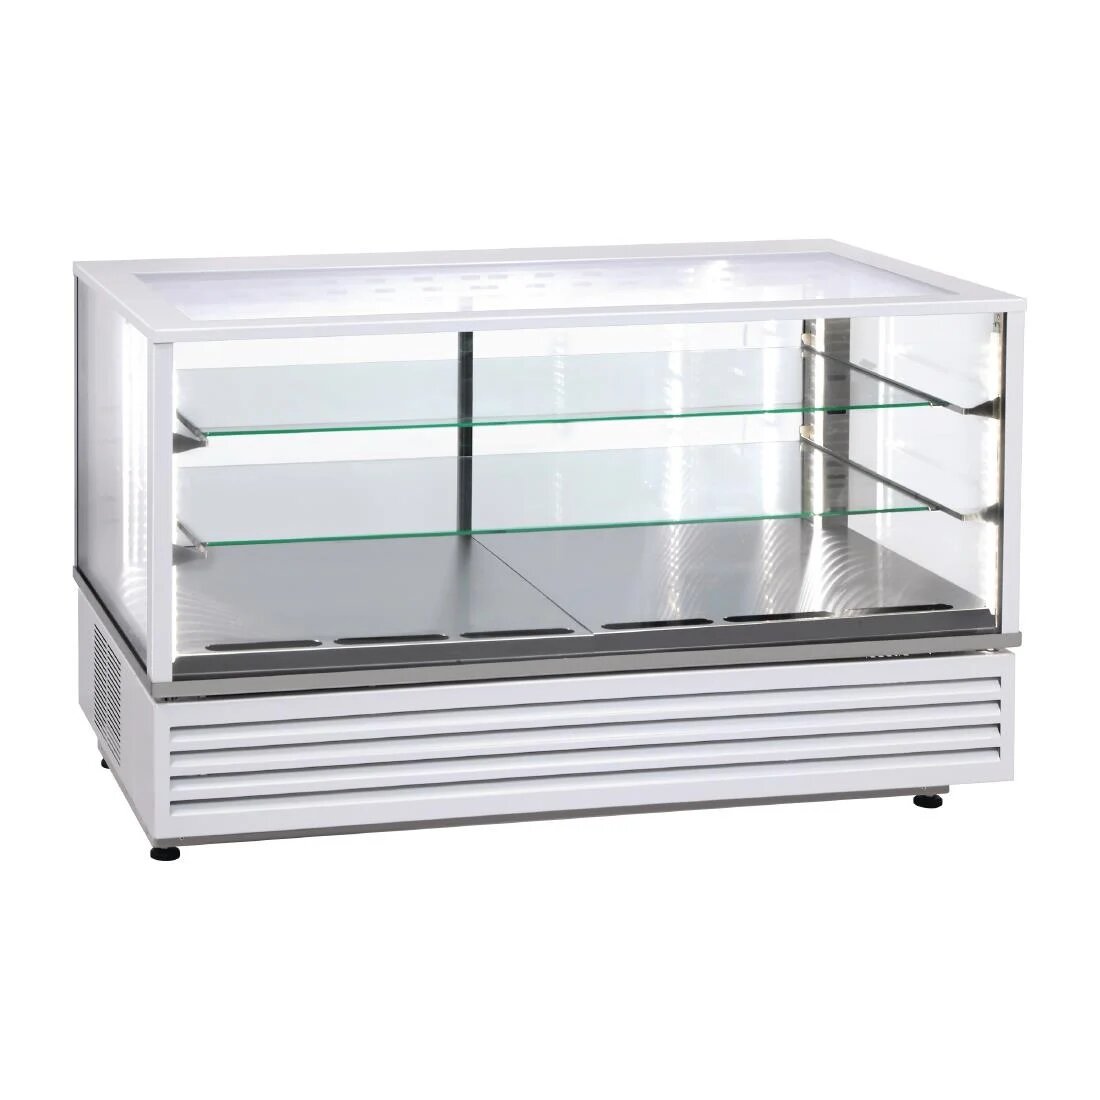 Roller Grill CD1200 I Refrigerated White Counter Top Display Unit W1200mm